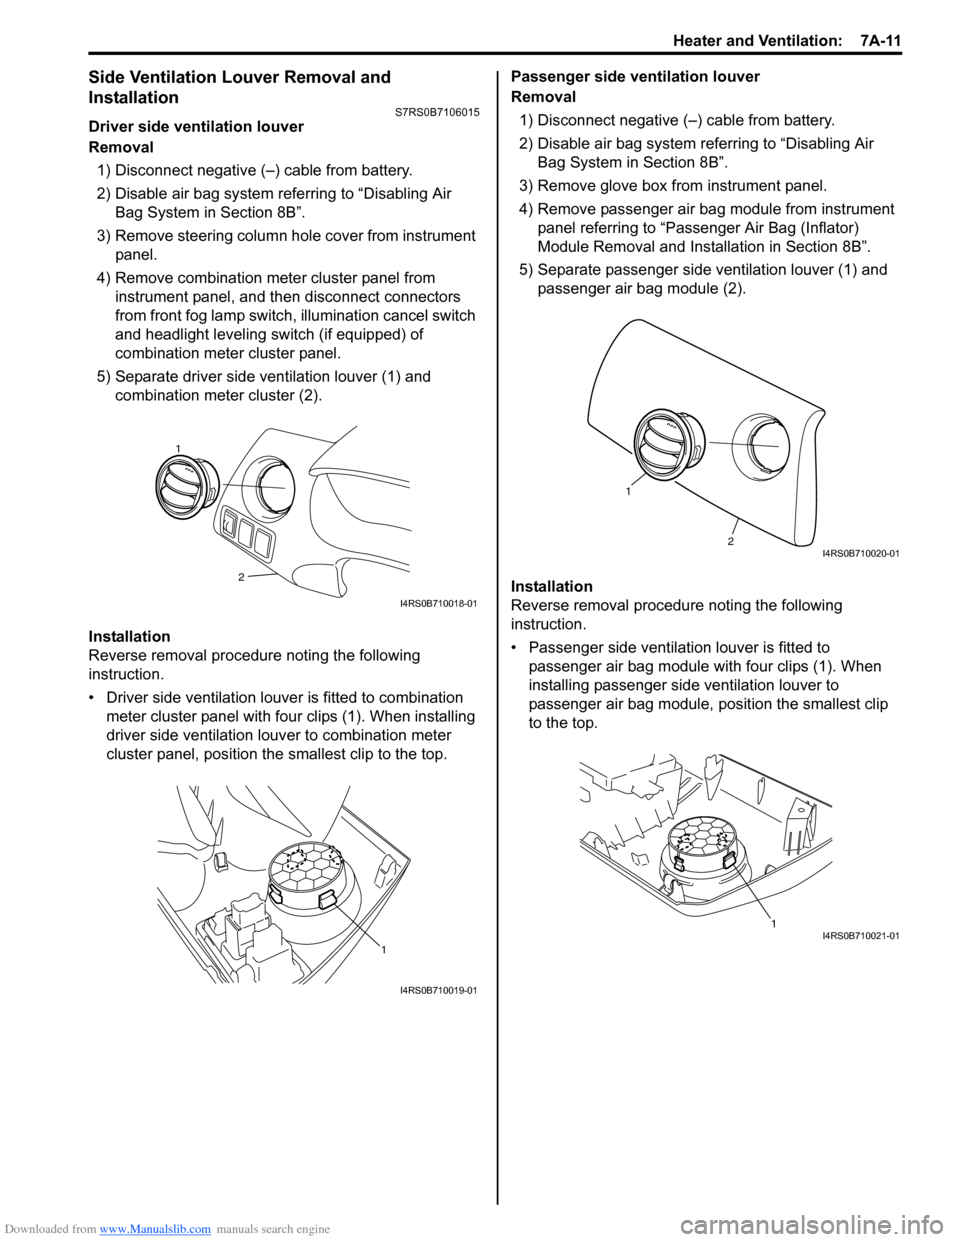 SUZUKI SWIFT 2008 2.G Service Workshop Manual Downloaded from www.Manualslib.com manuals search engine Heater and Ventilation:  7A-11
Side Ventilation Louver Removal and 
Installation
S7RS0B7106015
Driver side ventilation louver
Removal1) Disconn